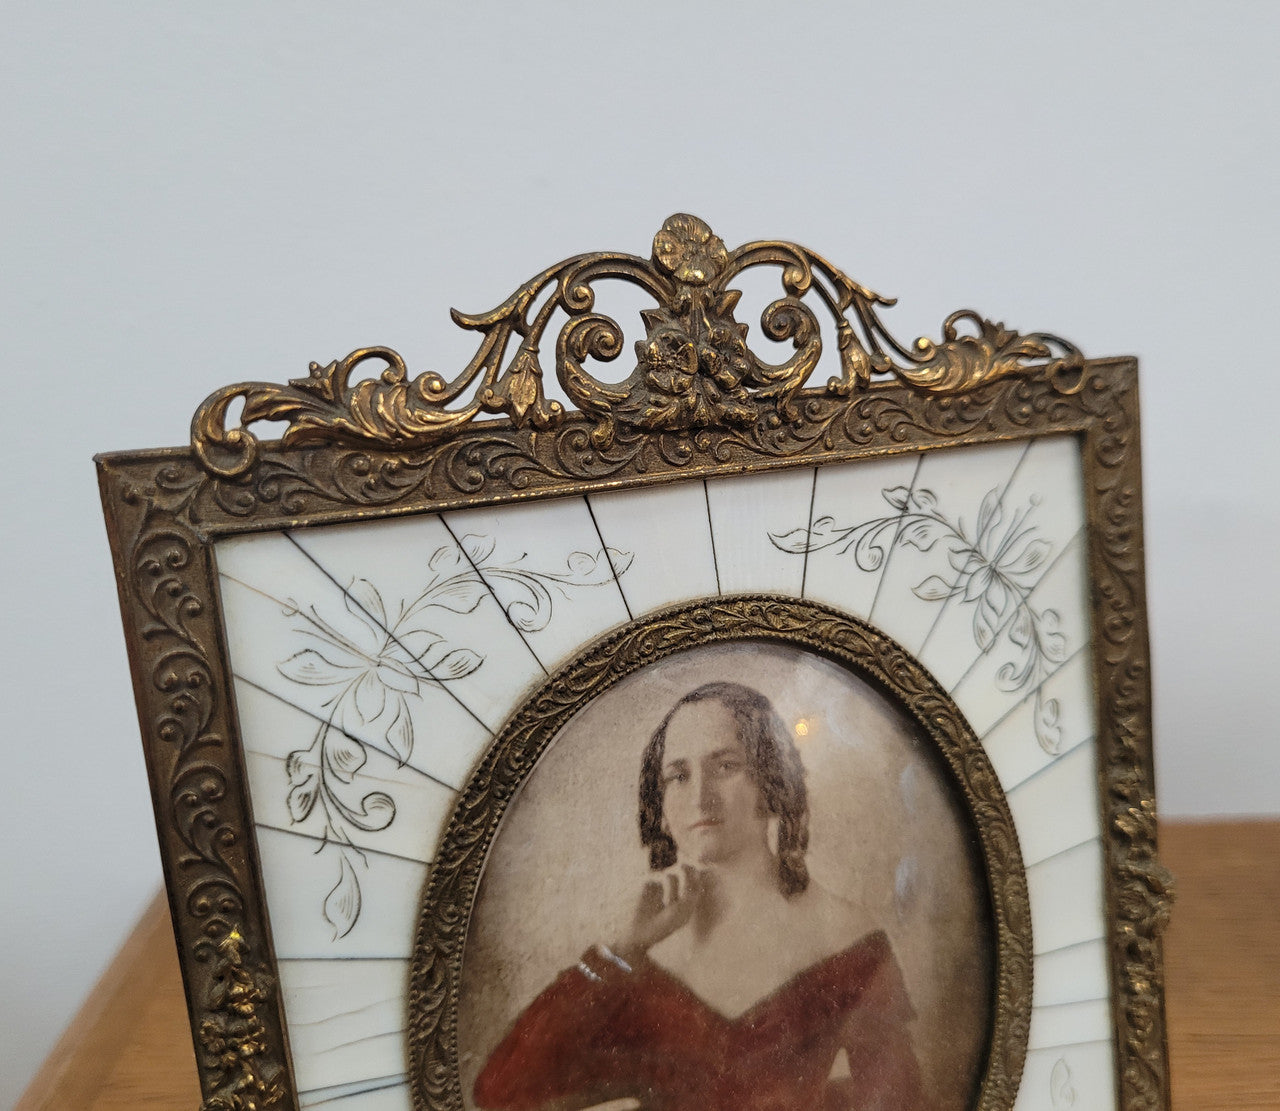 Hand coloured early photo of women in a stunning frame with paino key surround and detailed gilded metal frame.